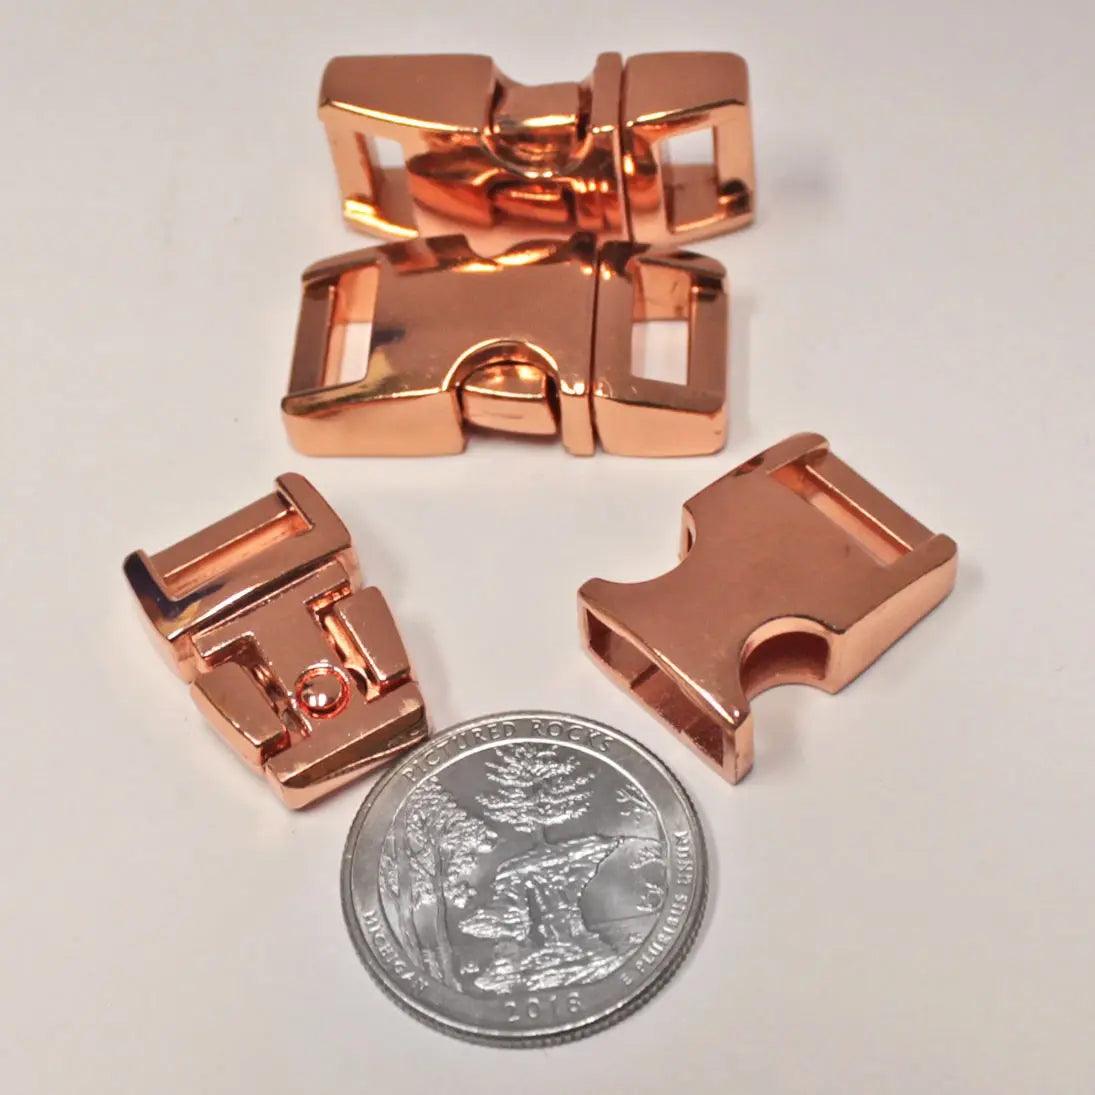 1/2 IN - POLISH Copper-Colored - Side Release Buckle 1perpack paracordwholesale